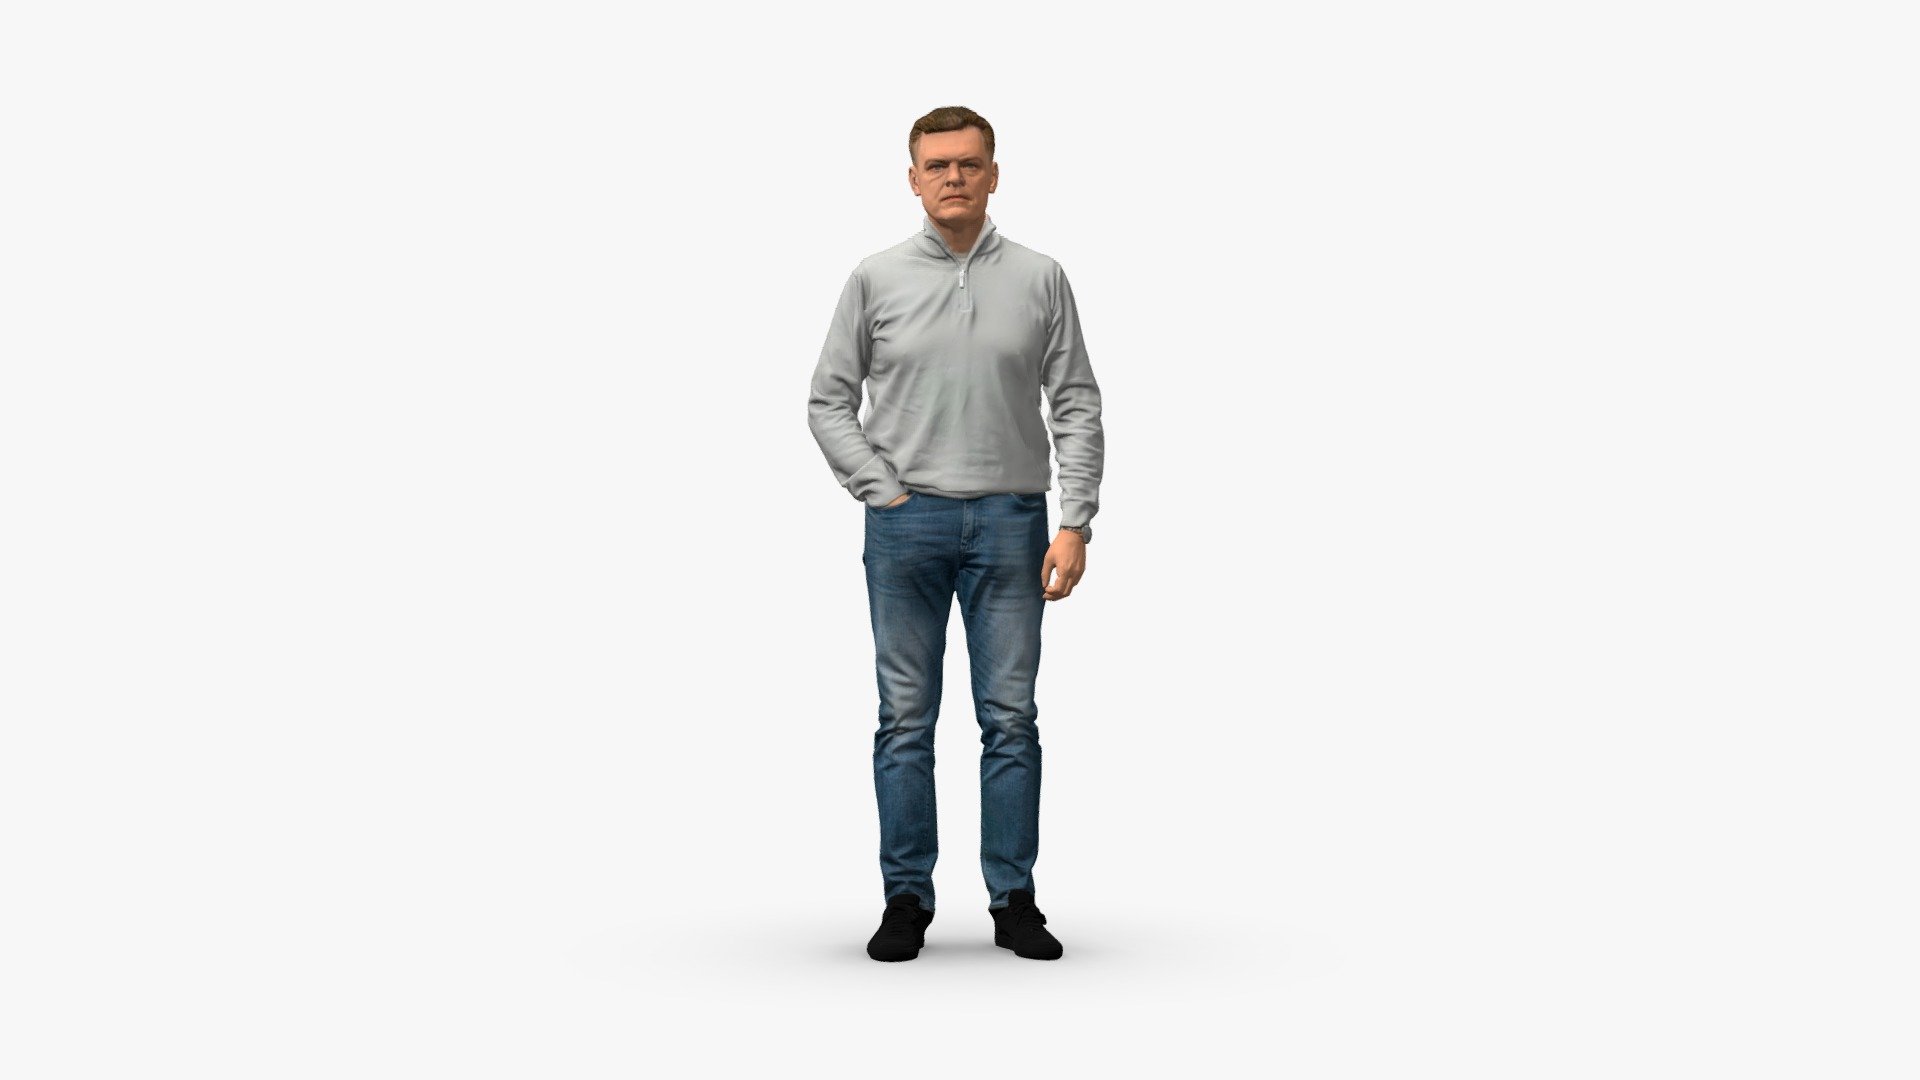 The 3D model portrays a middle-aged man dressed in a casual outfit, wearing black ankle boots, blue jeans, and a gray sweatshirt. 

The 3D model was obtained by scanning 3d model